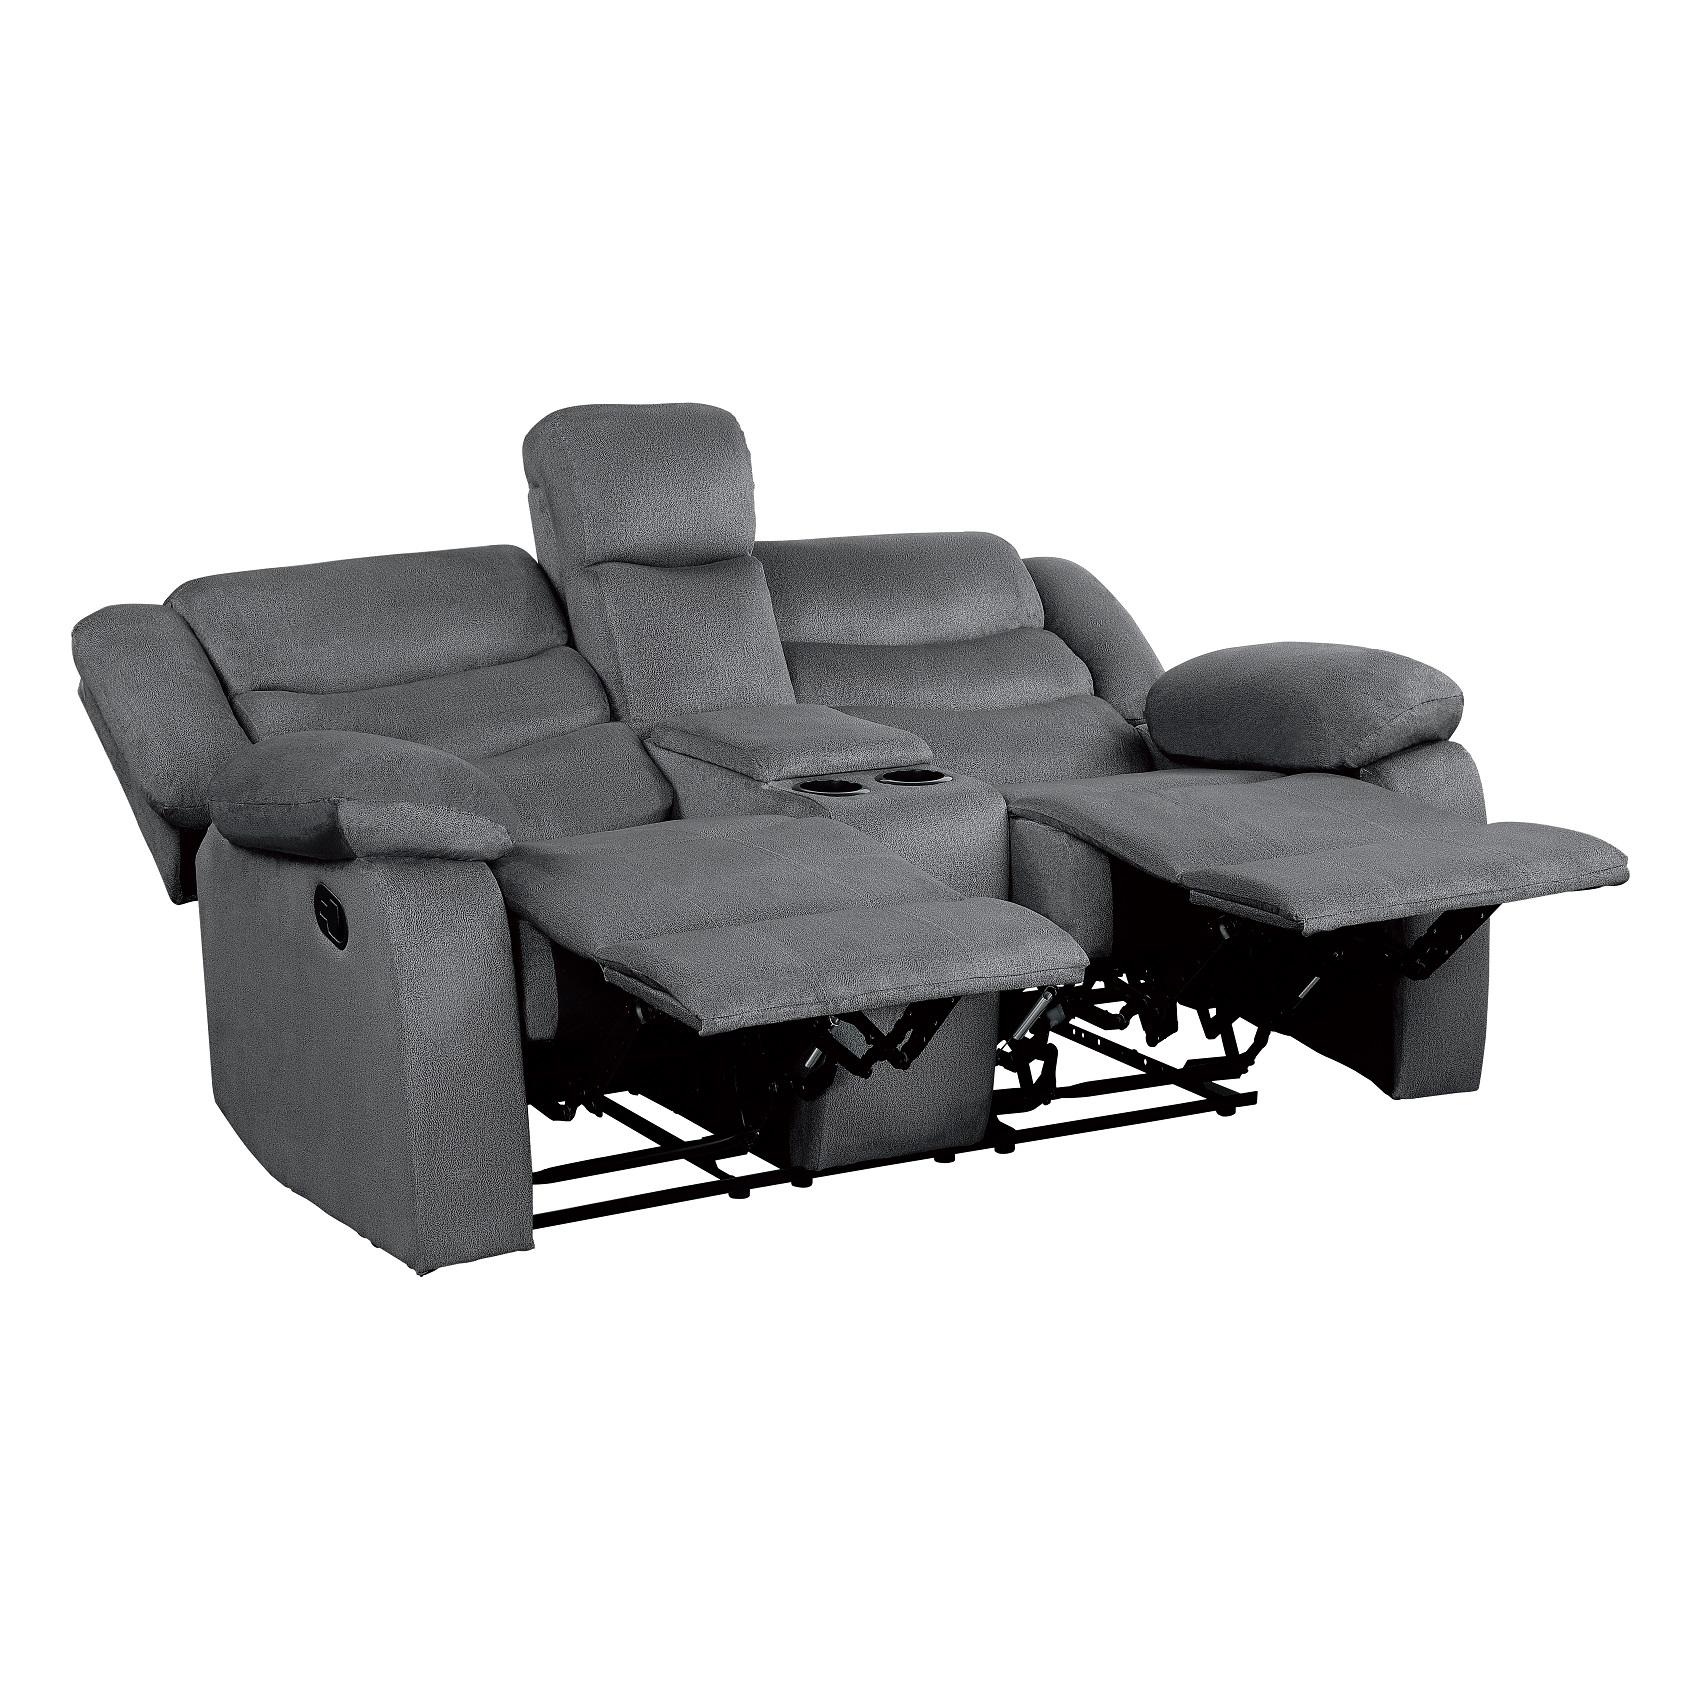 

    
Homelegance 9526GY-2 Discus Reclining Loveseat Gray 9526GY-2
